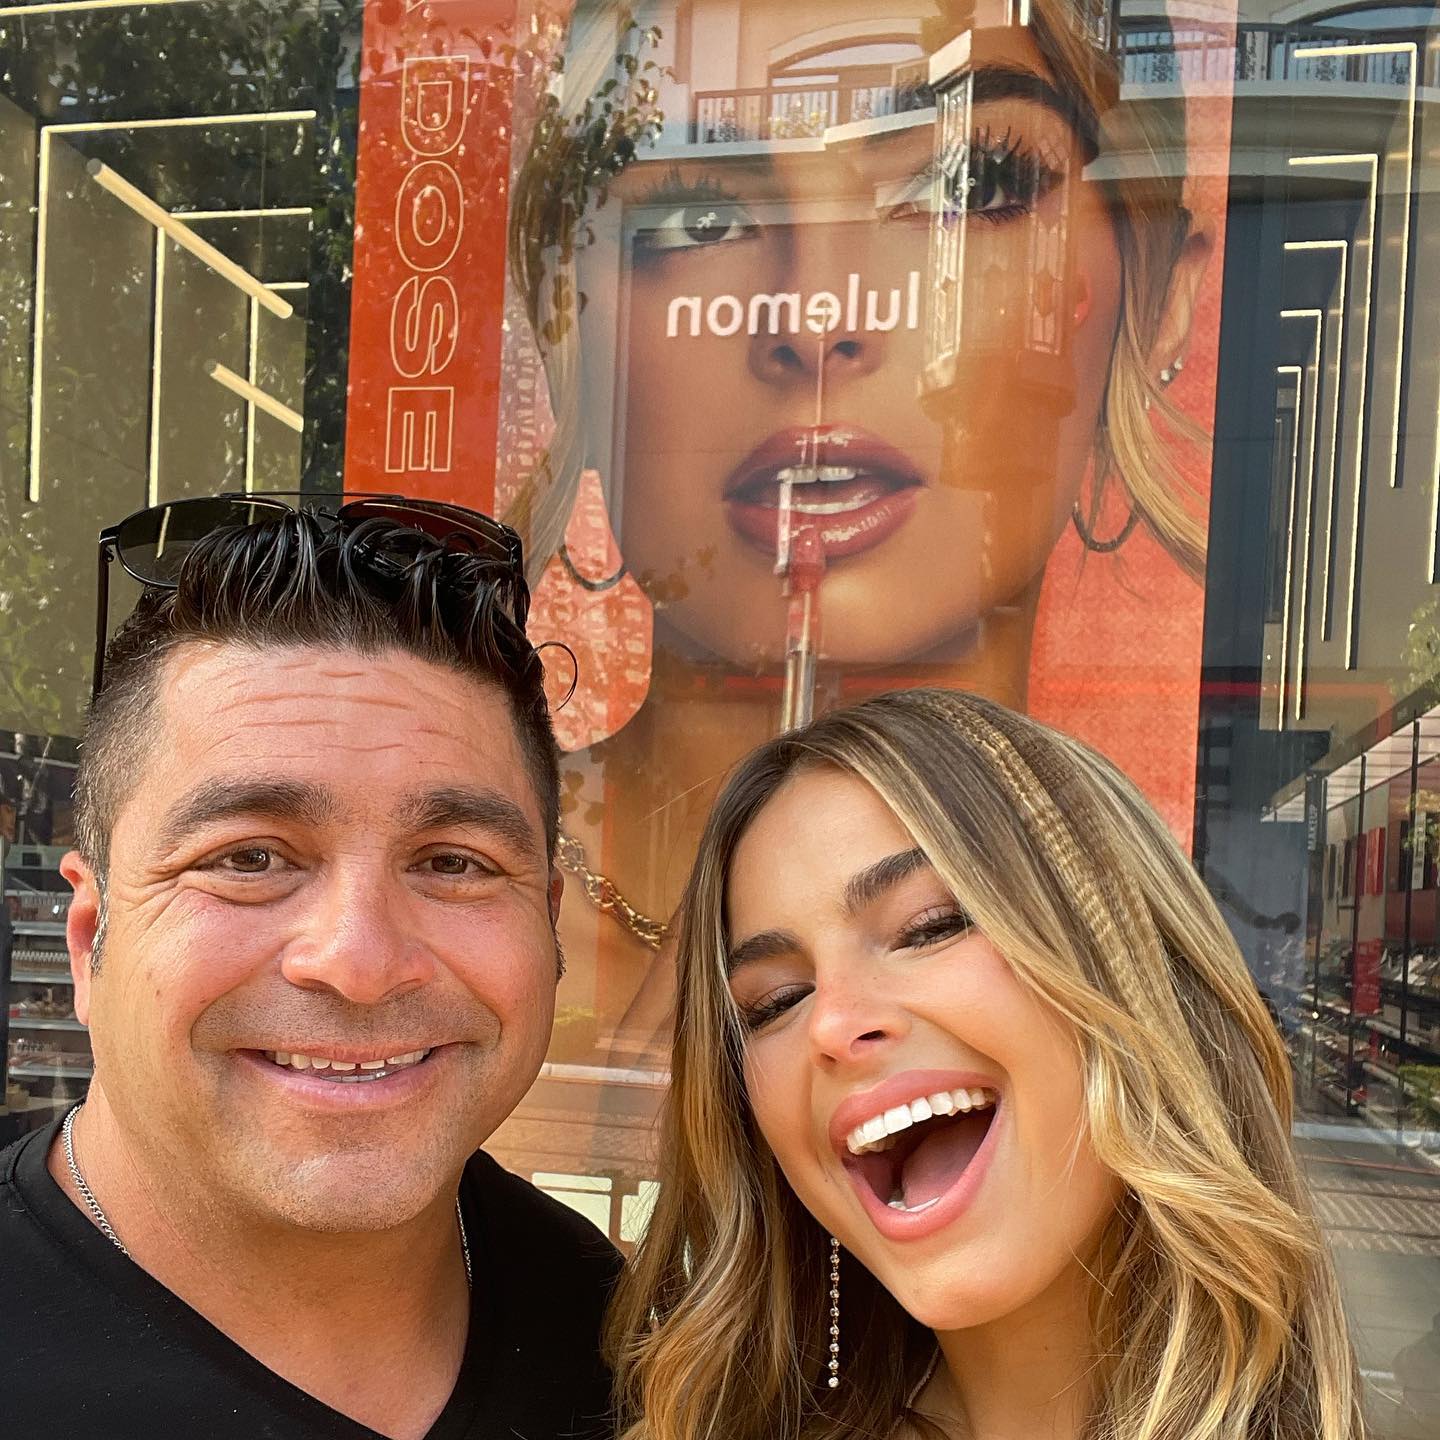 Monty Lopez and Addison Rae outside a store in Los Angeles